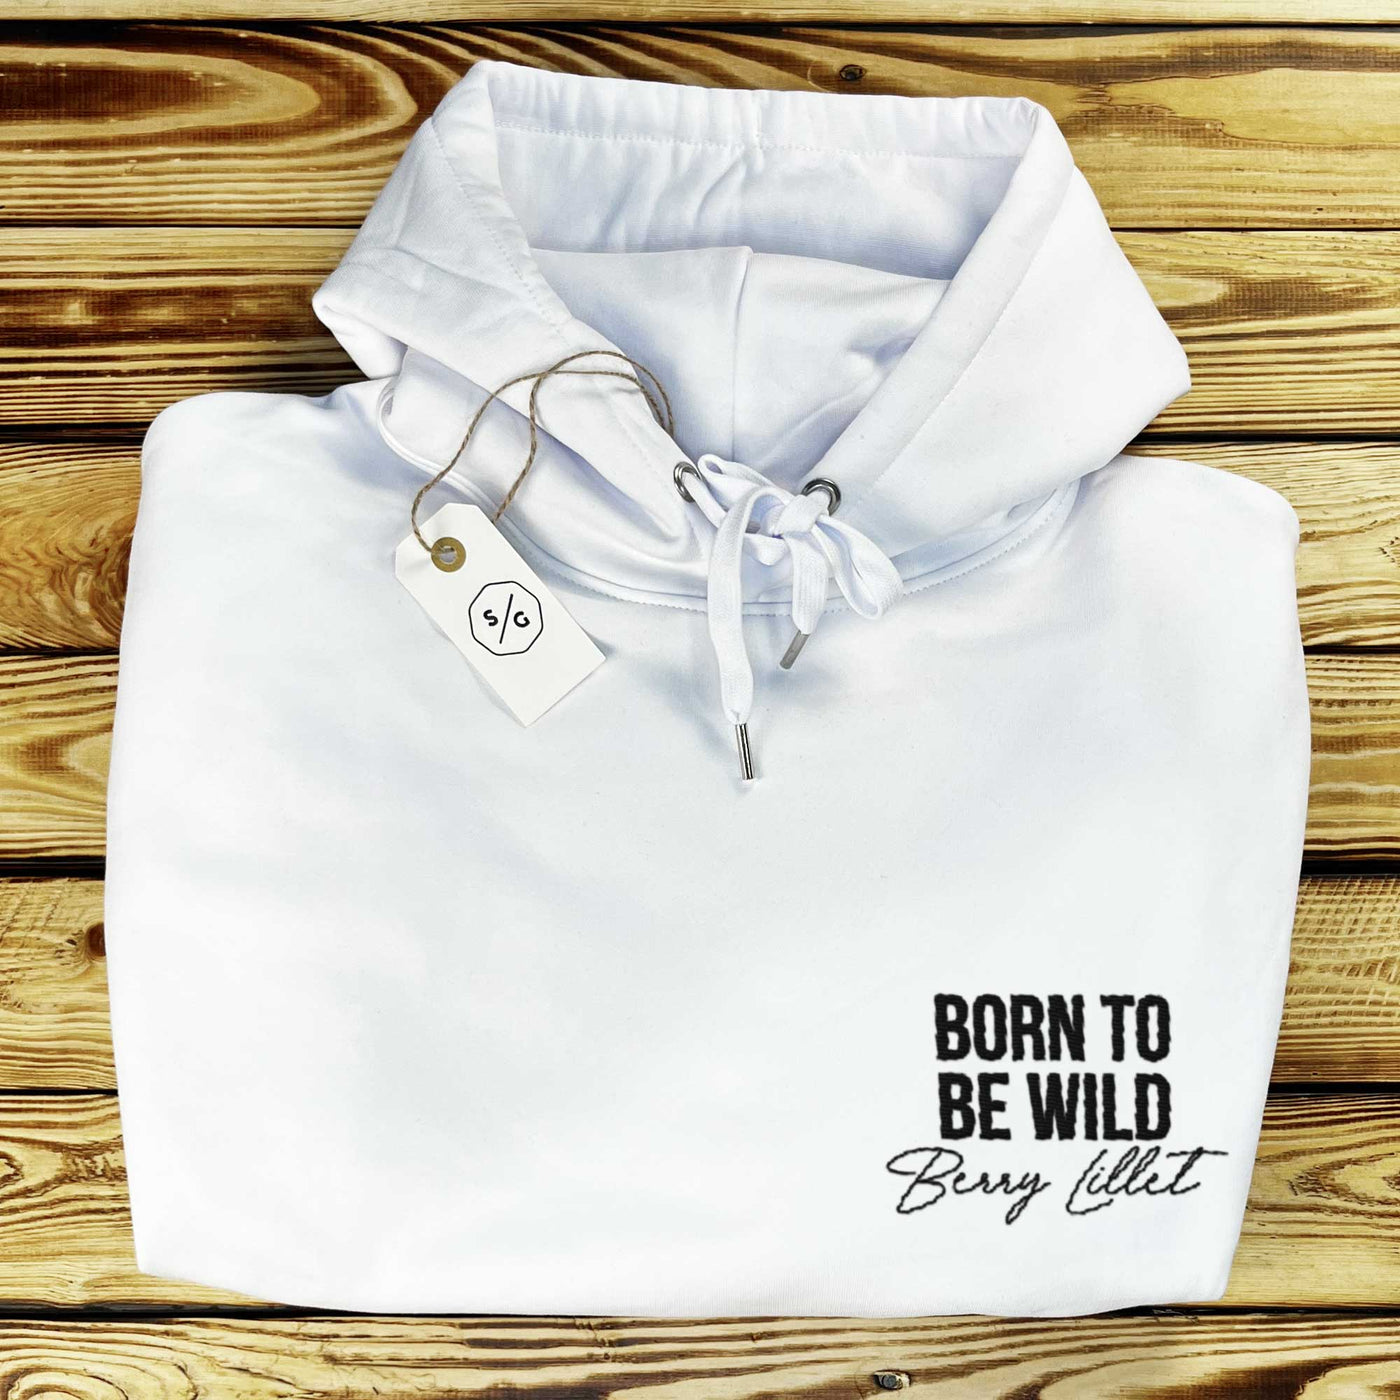 BESTICKTER HOODIE • BORN TO BE WILDBERRY LILLET